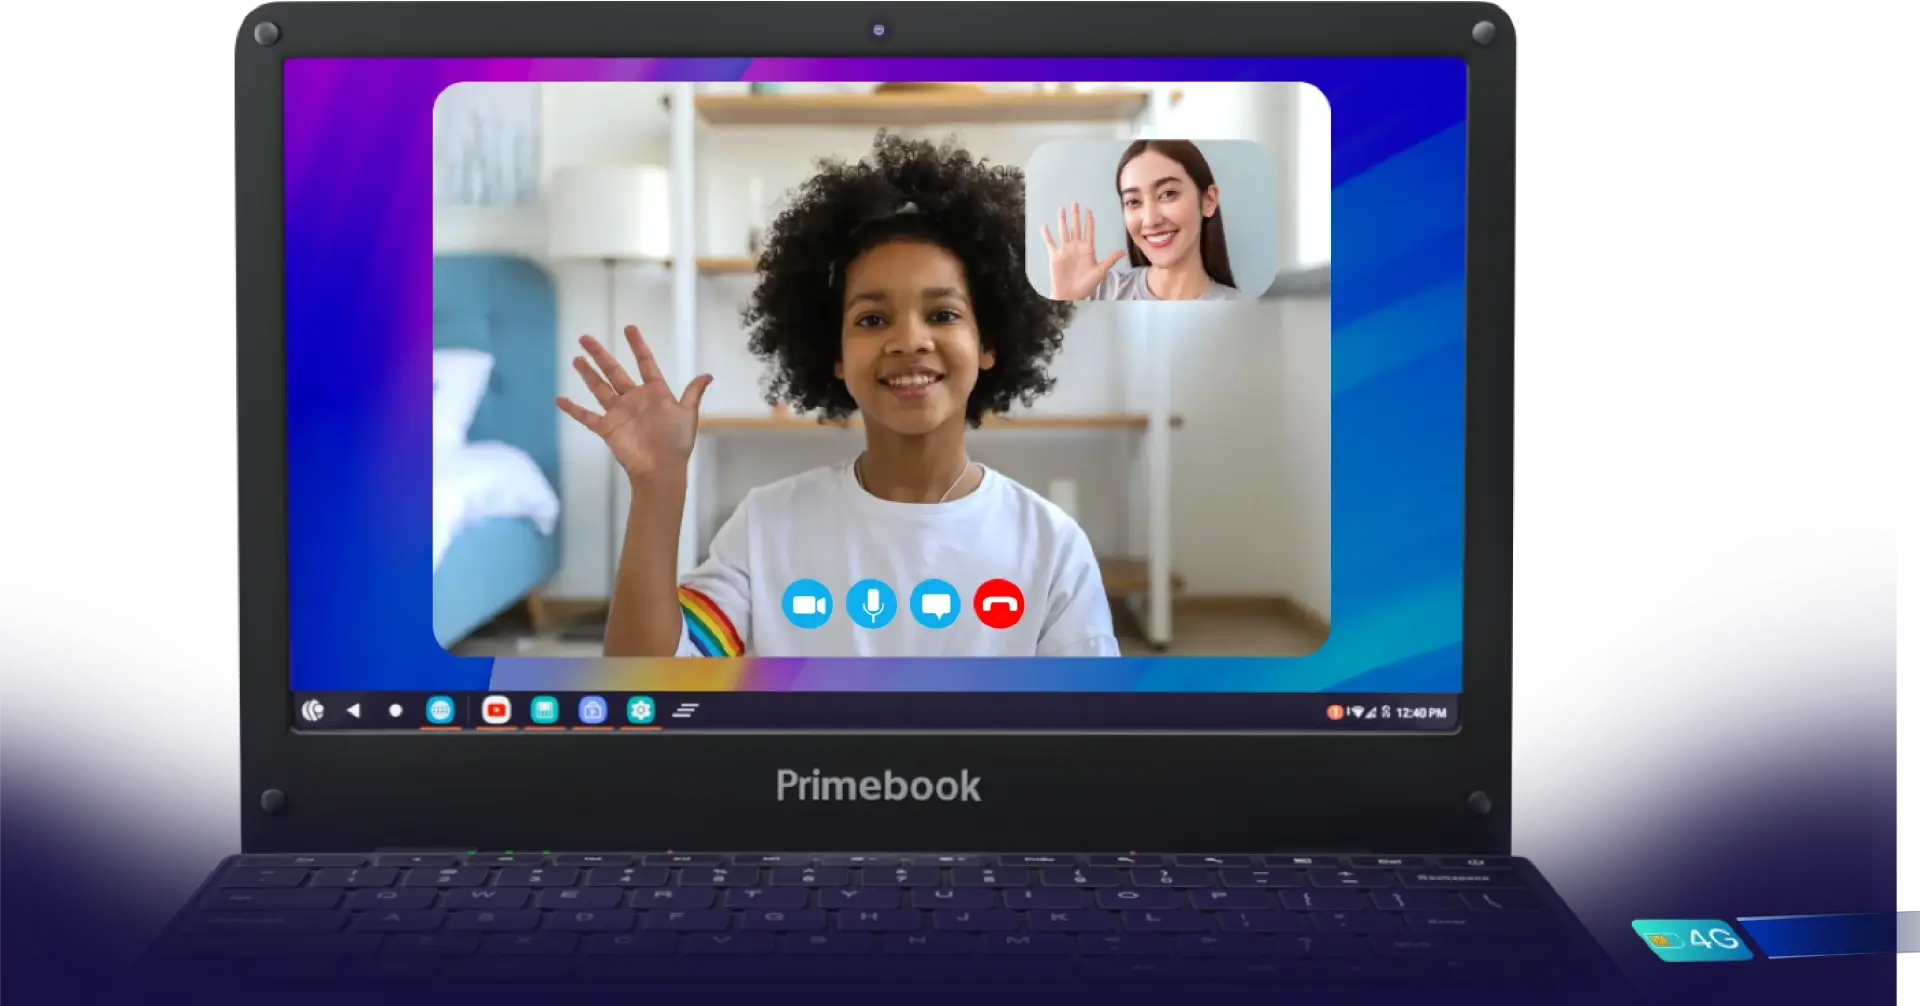 Primebook laptops with video calling feature